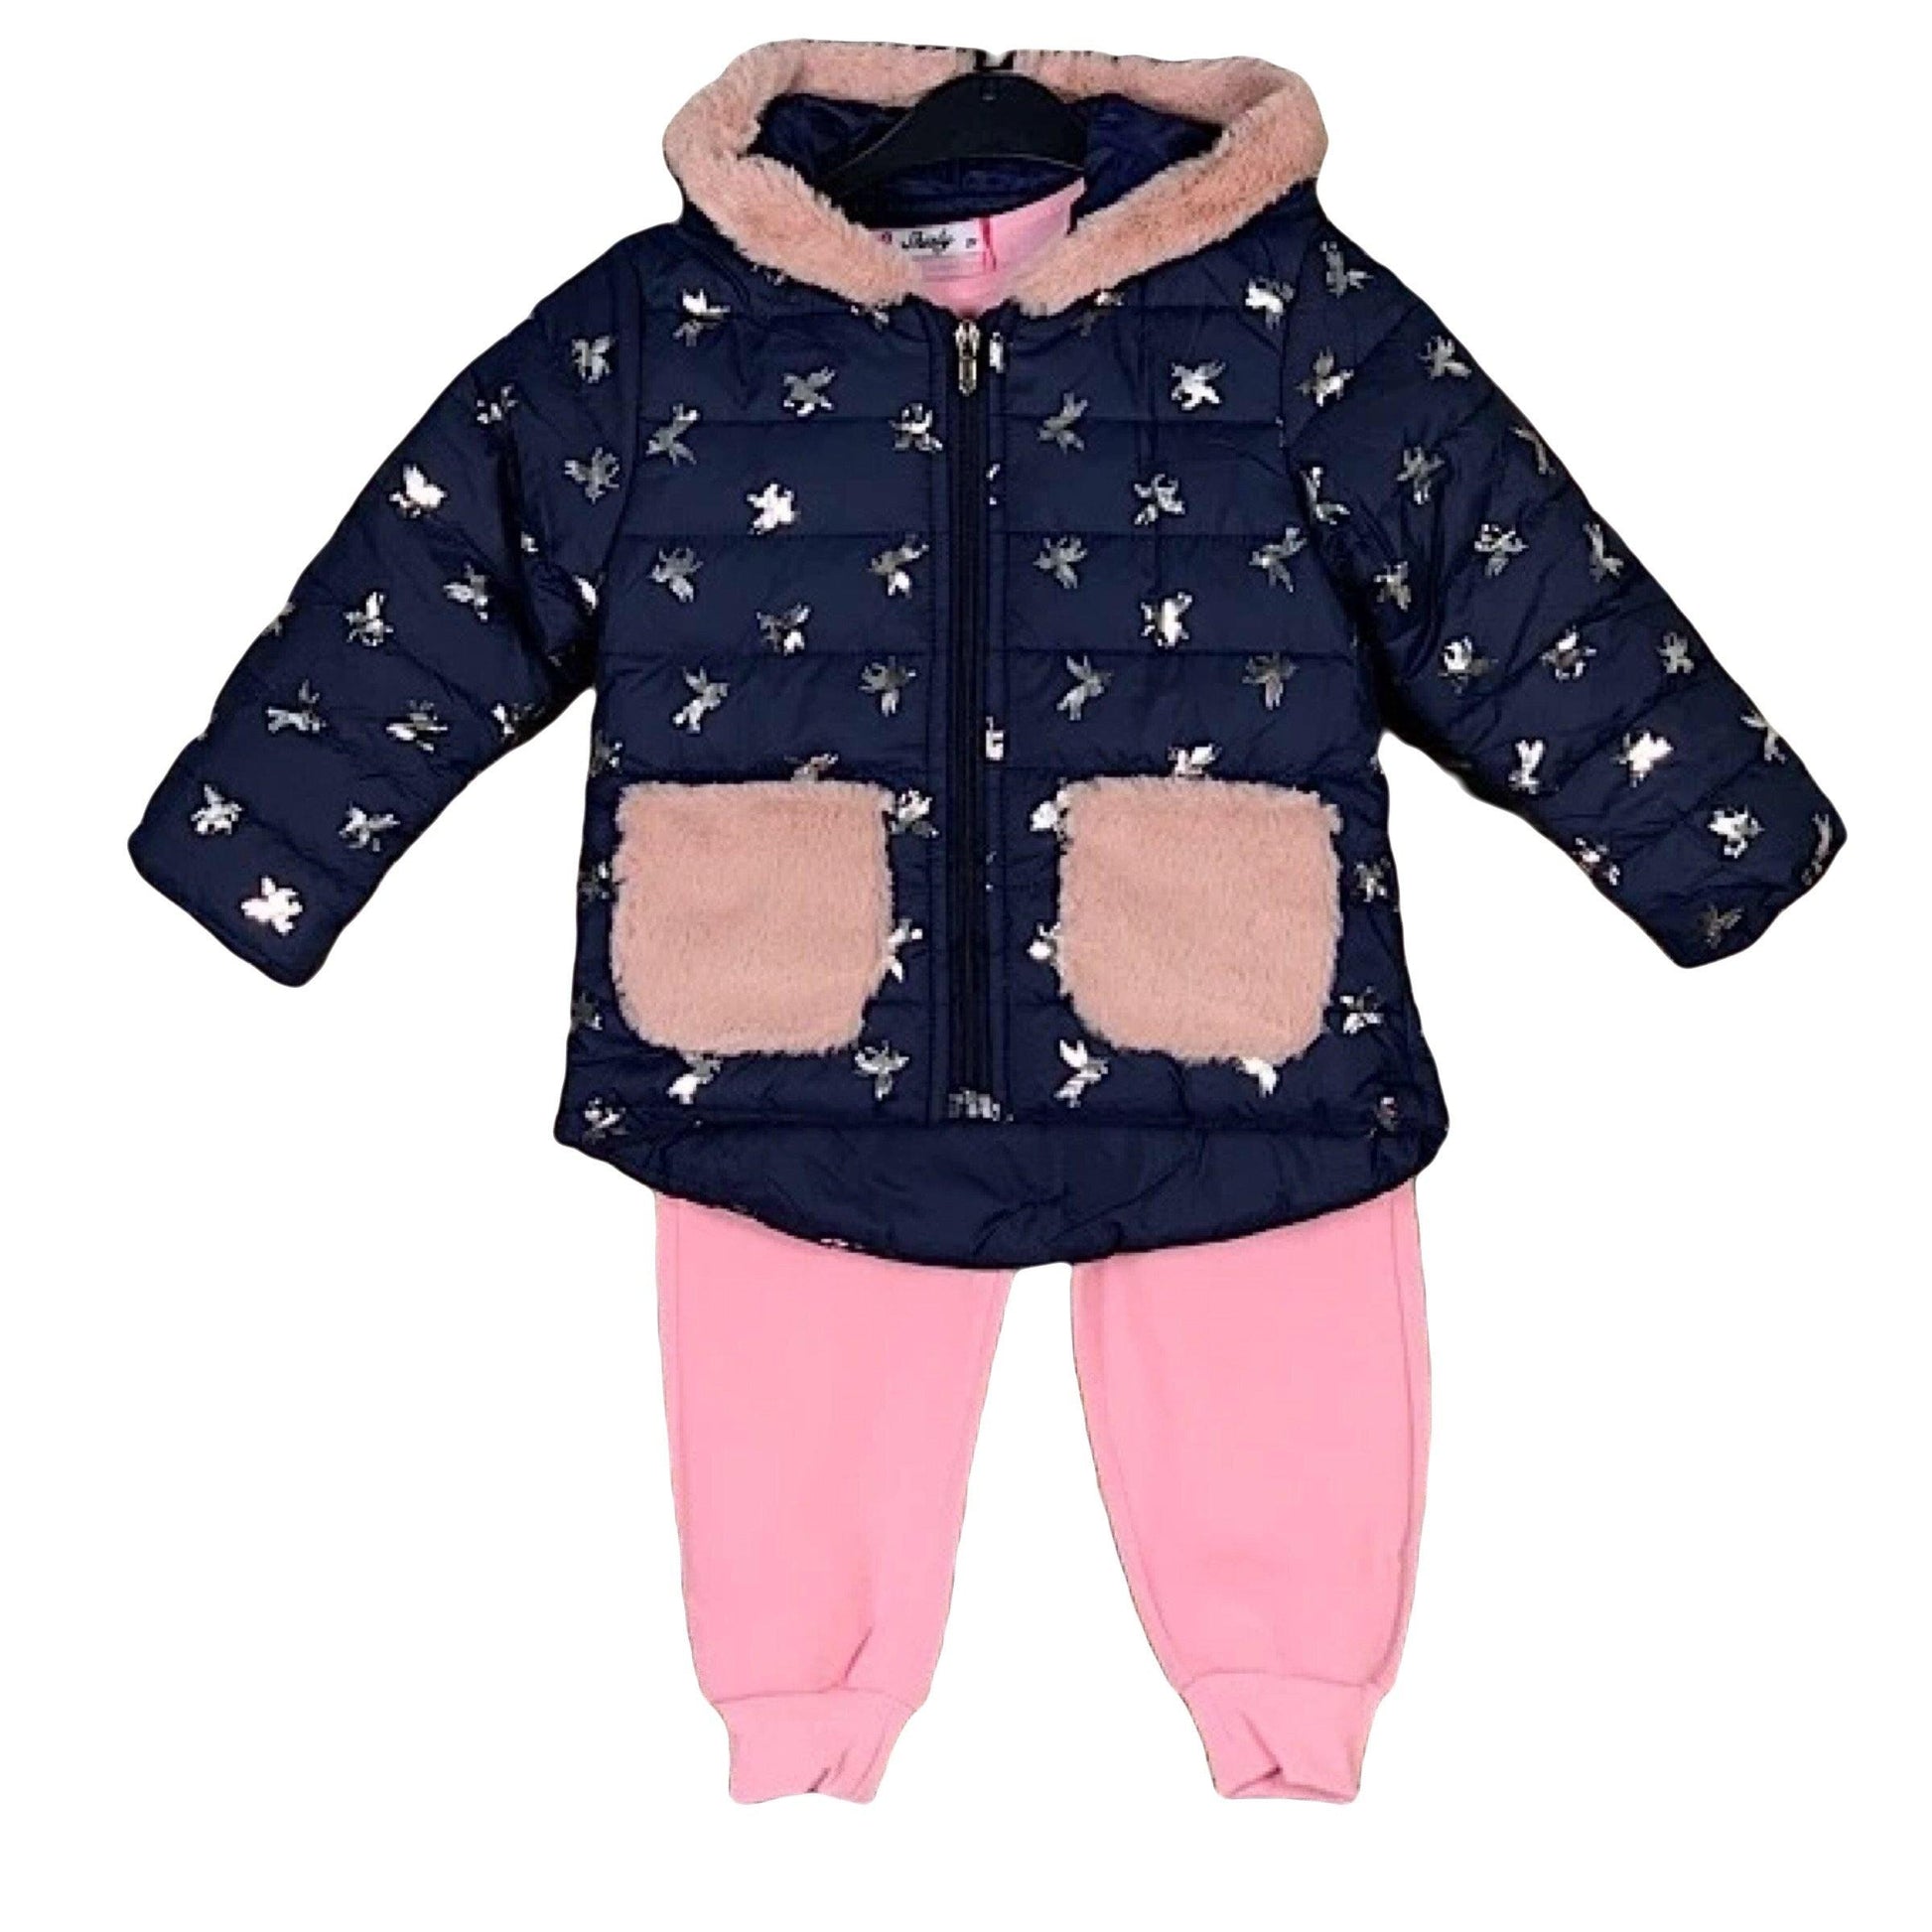 Girls Unicorn Coat and Loungewear Outfit | Oscar & Me | Baby & Children’s Clothing & Accessories